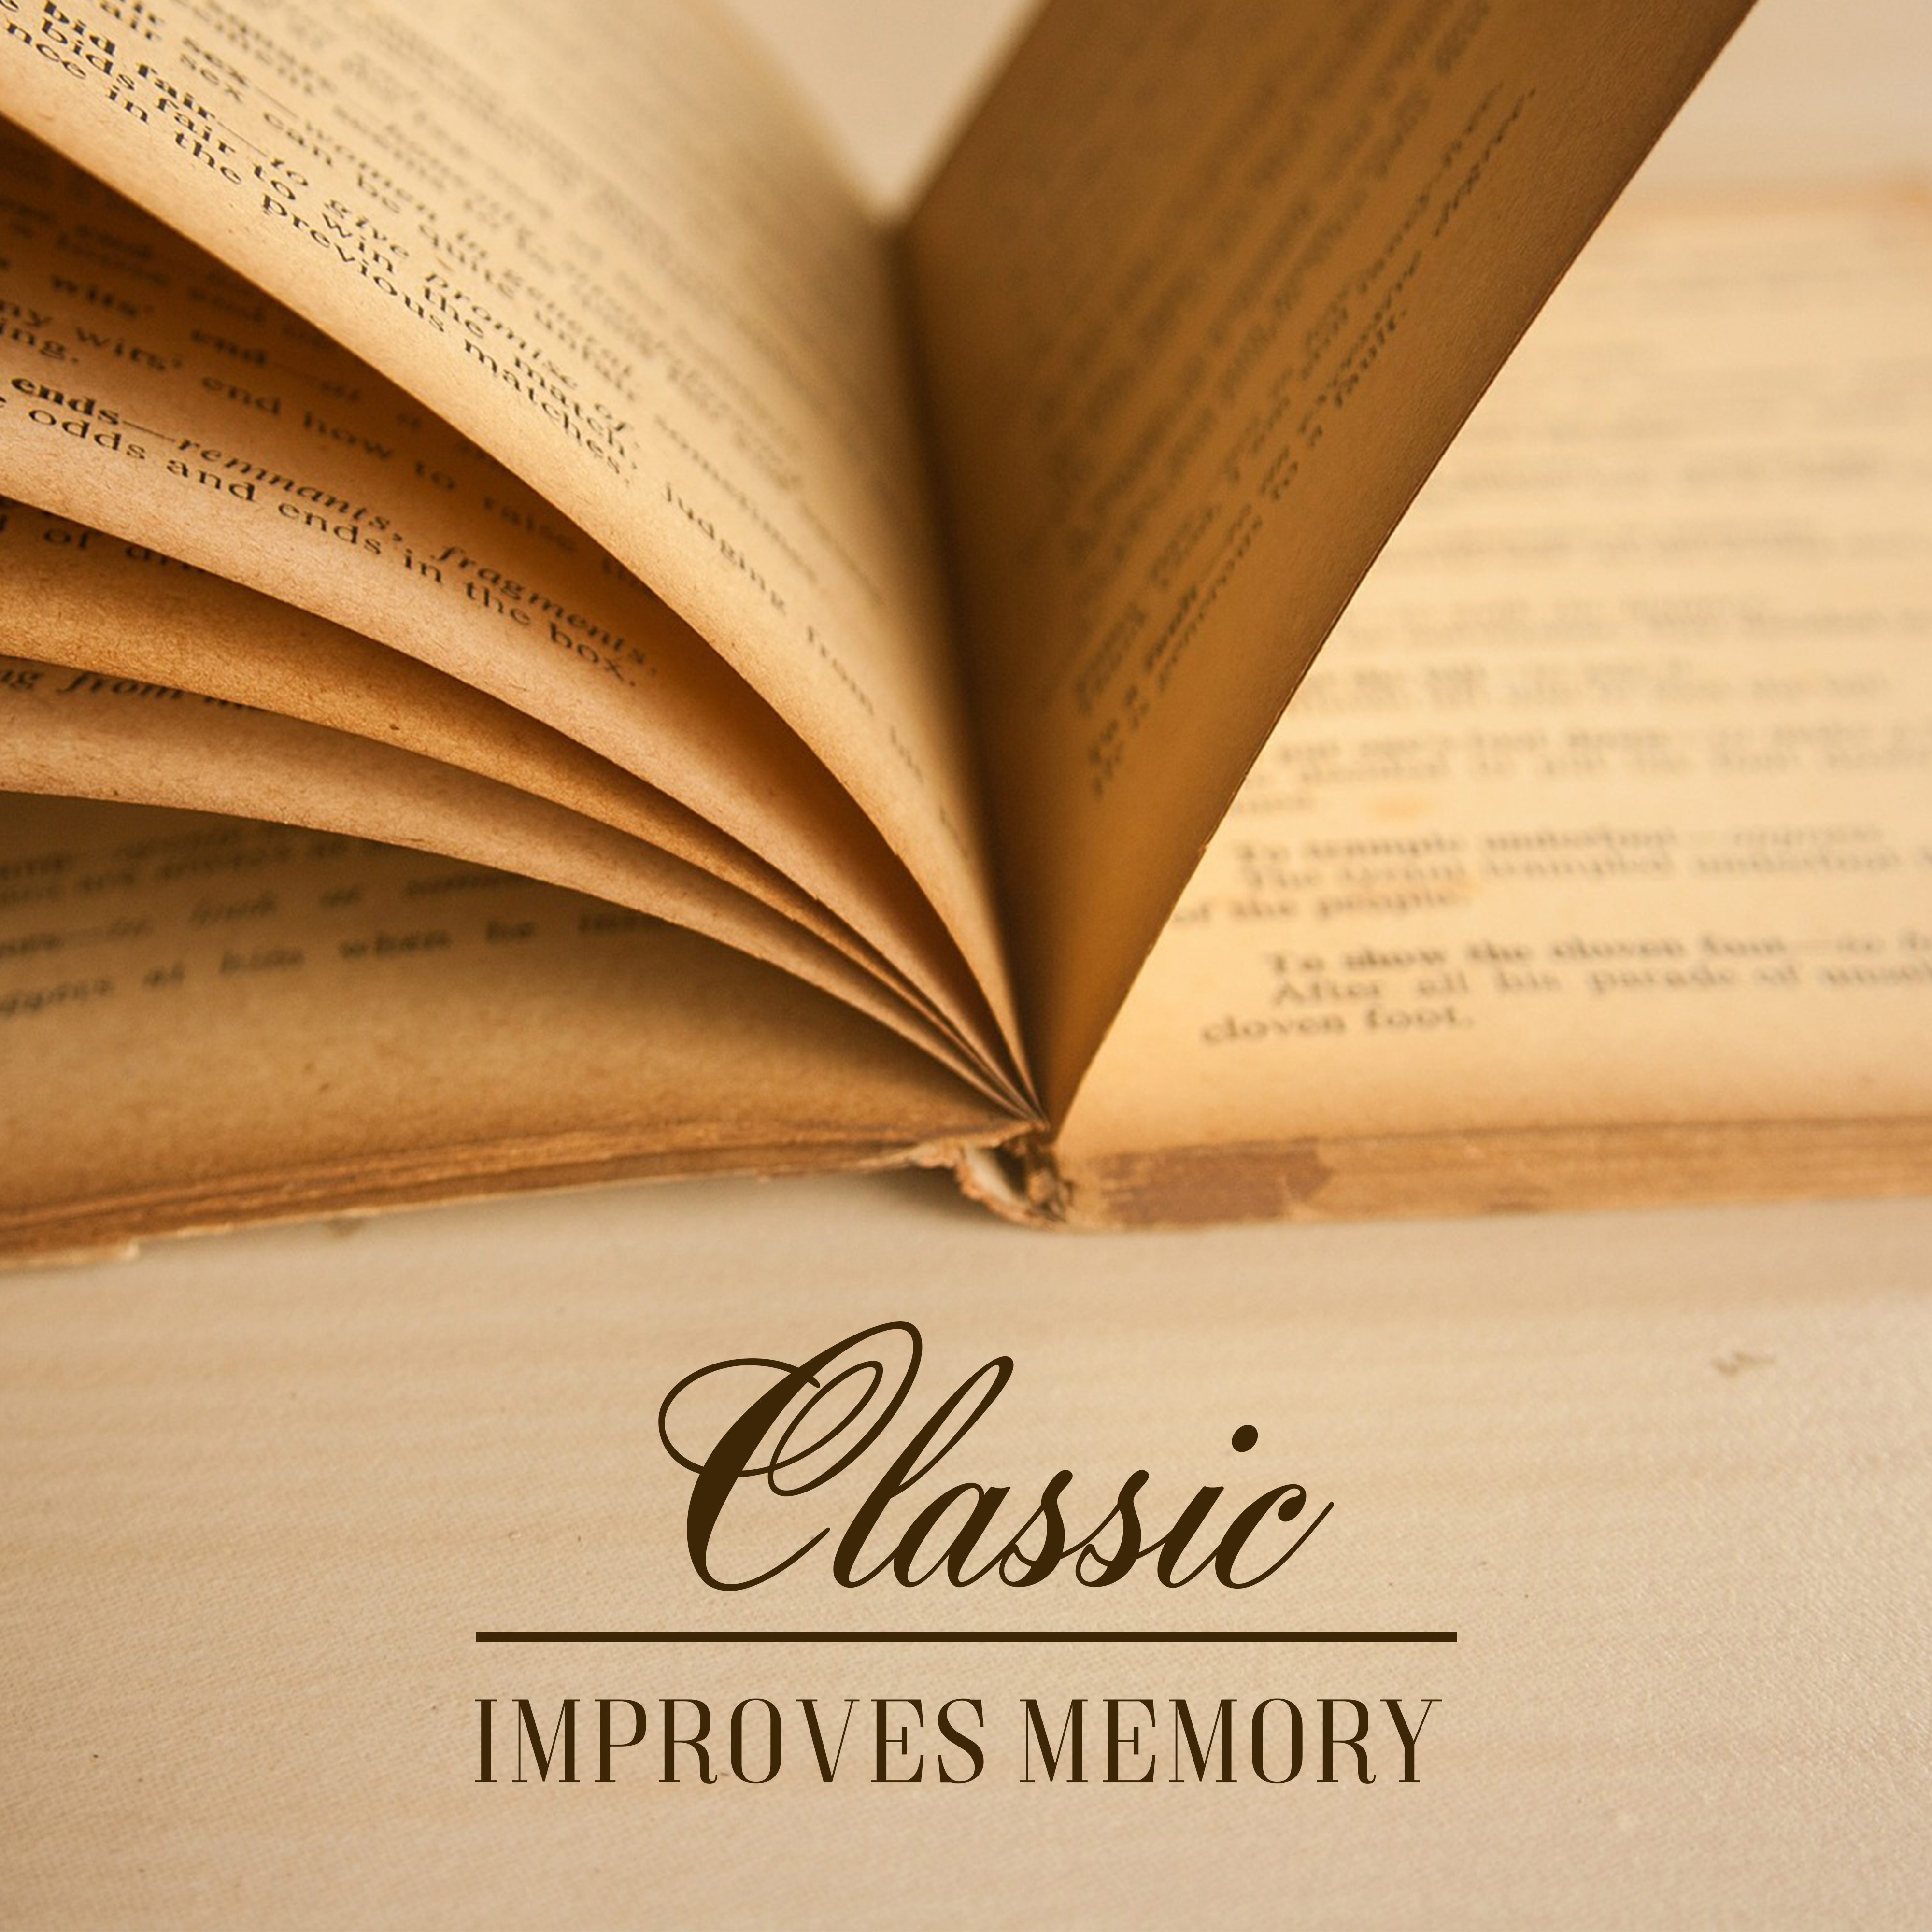 Classic Improves Memory – Best Studying Music, Deep Focus, Relaxation Sounds, Classical Music, Bach, Mozart